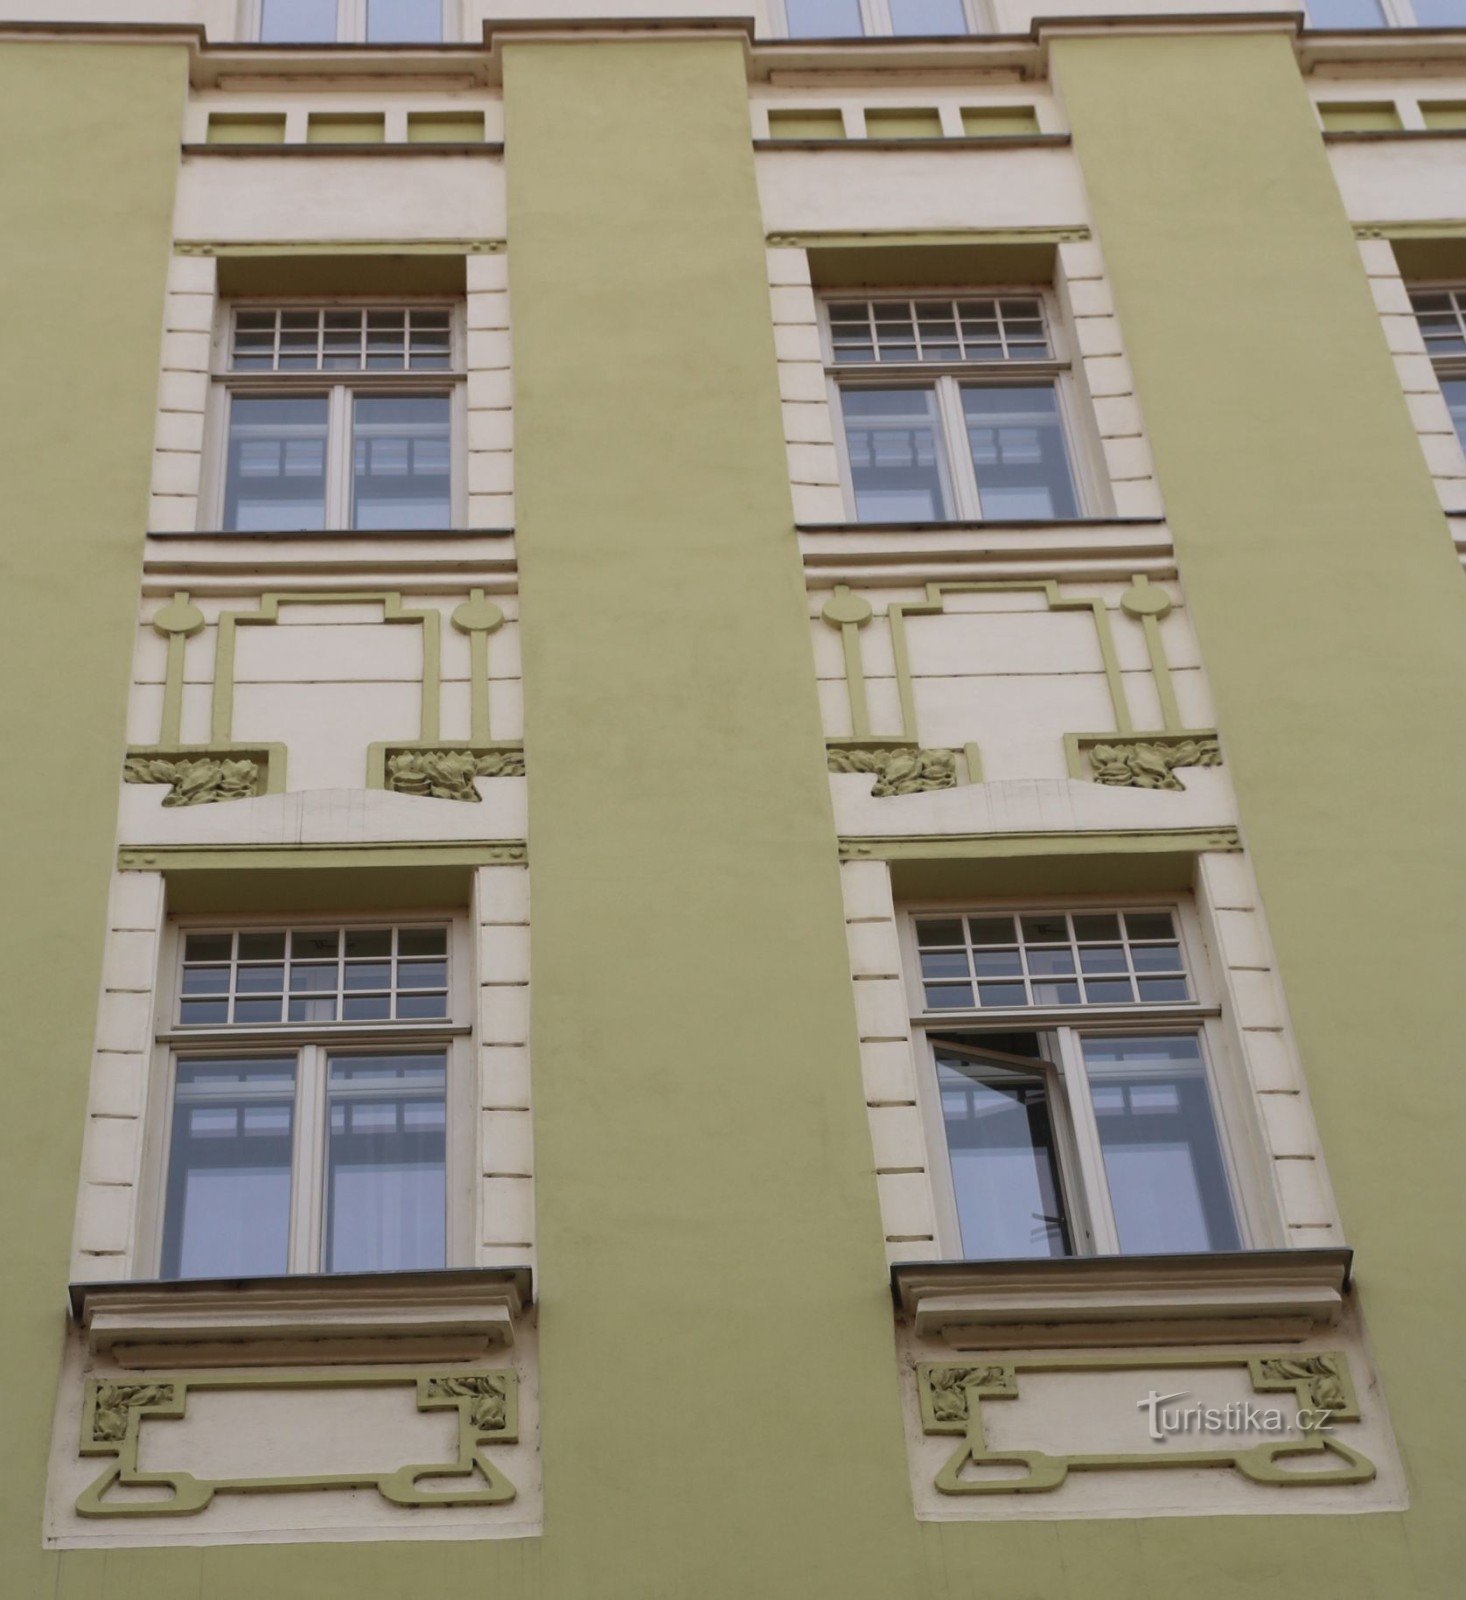 Detail of the facade of the house with windows